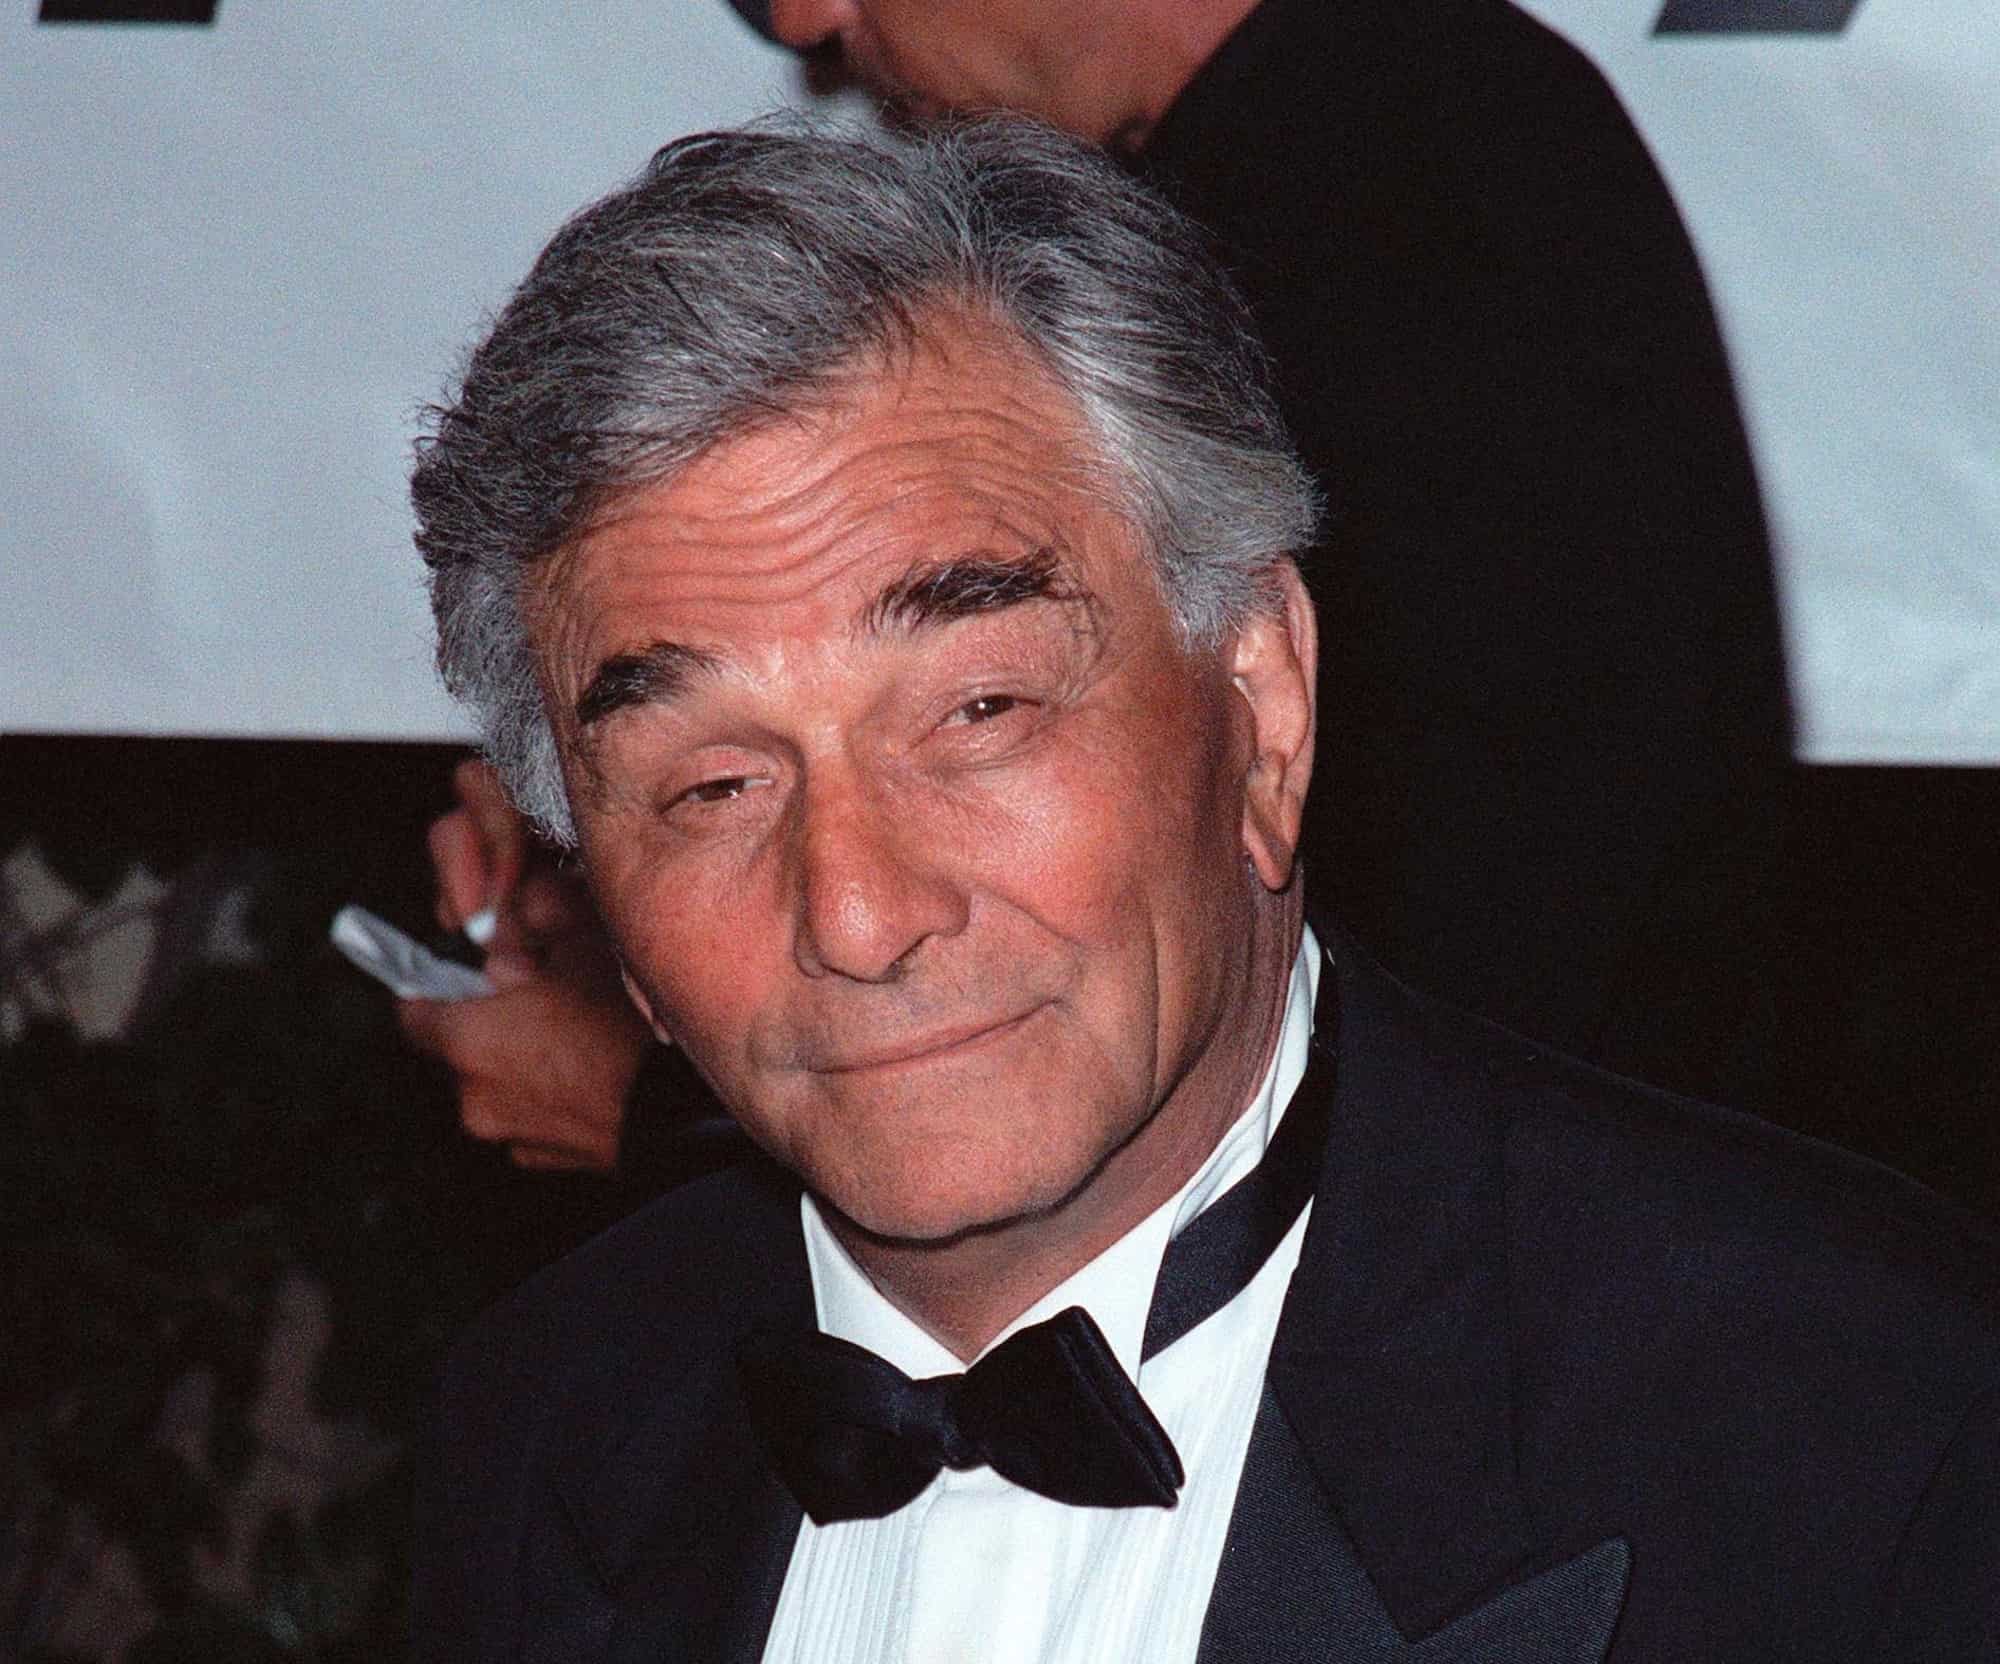 How Did Peter Falk His Eye?